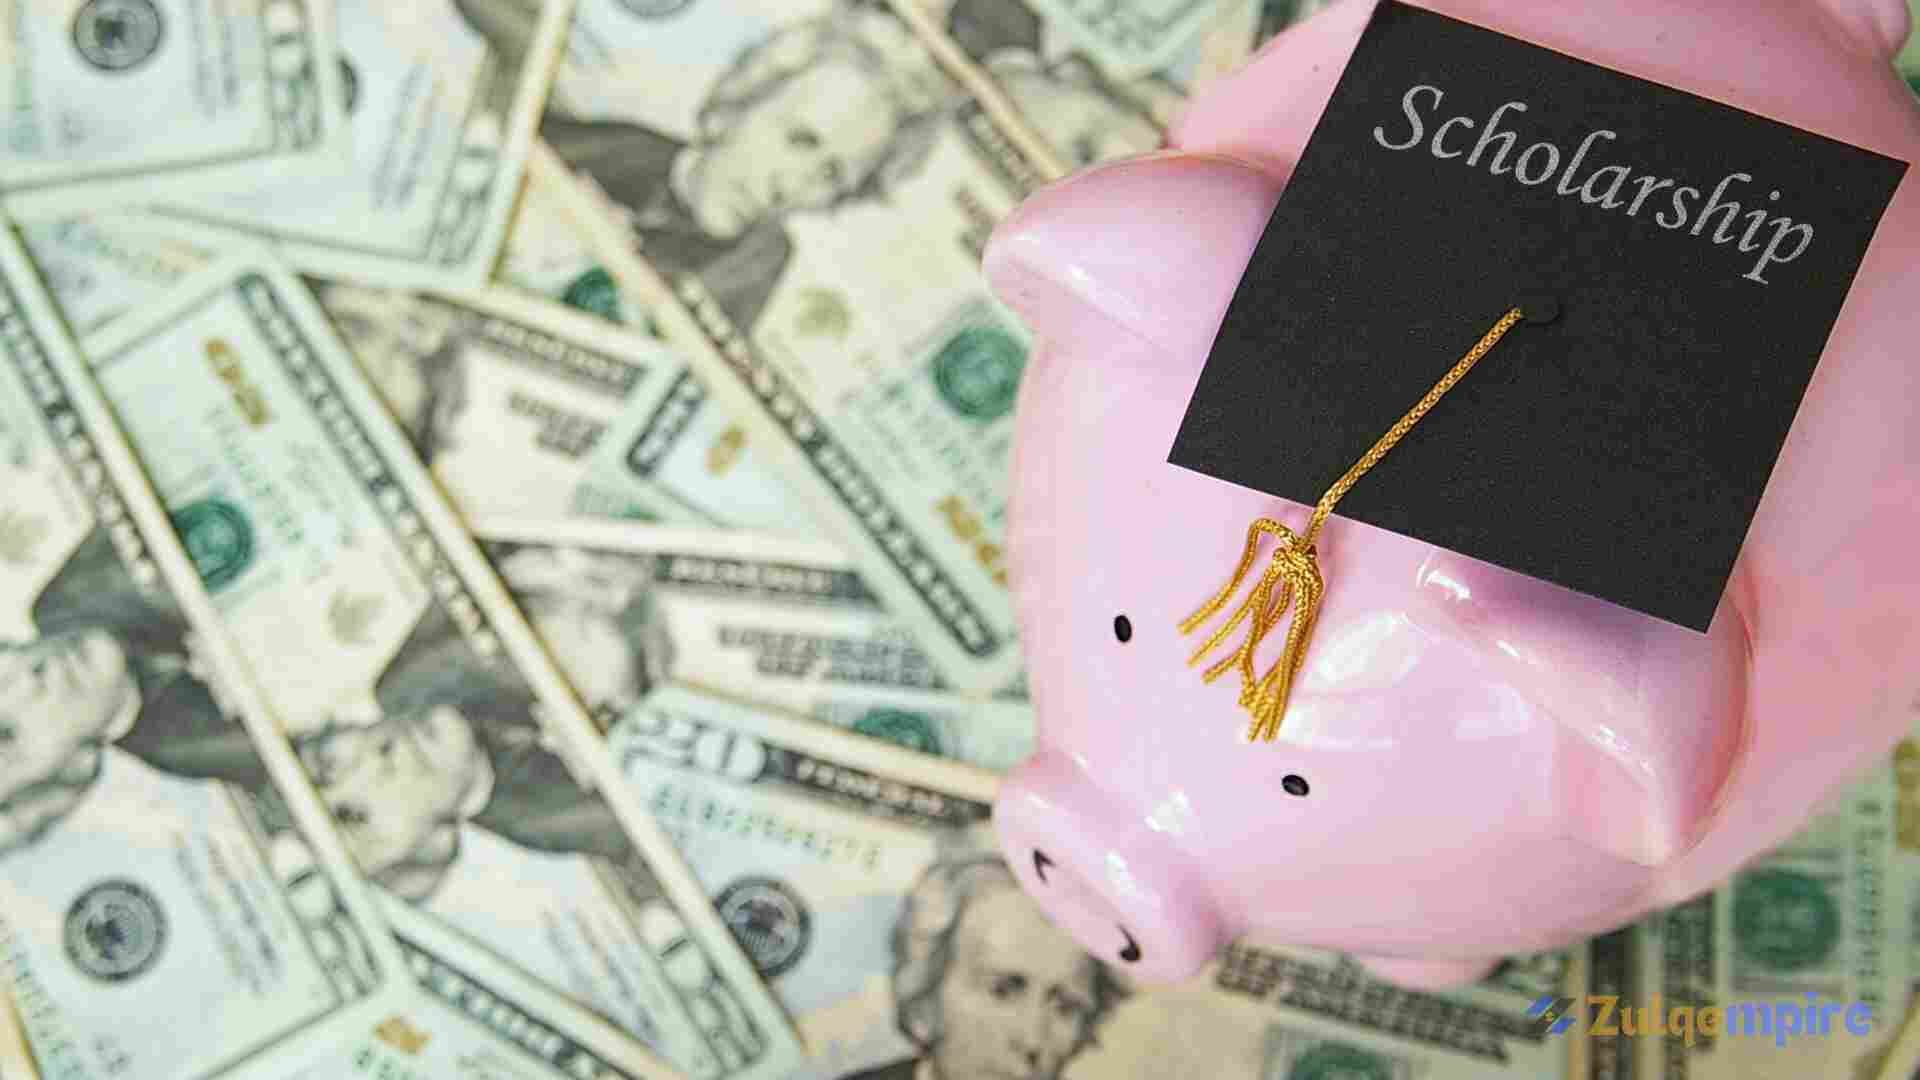 Beyond Scholarships: Financial Aid Options to Consider